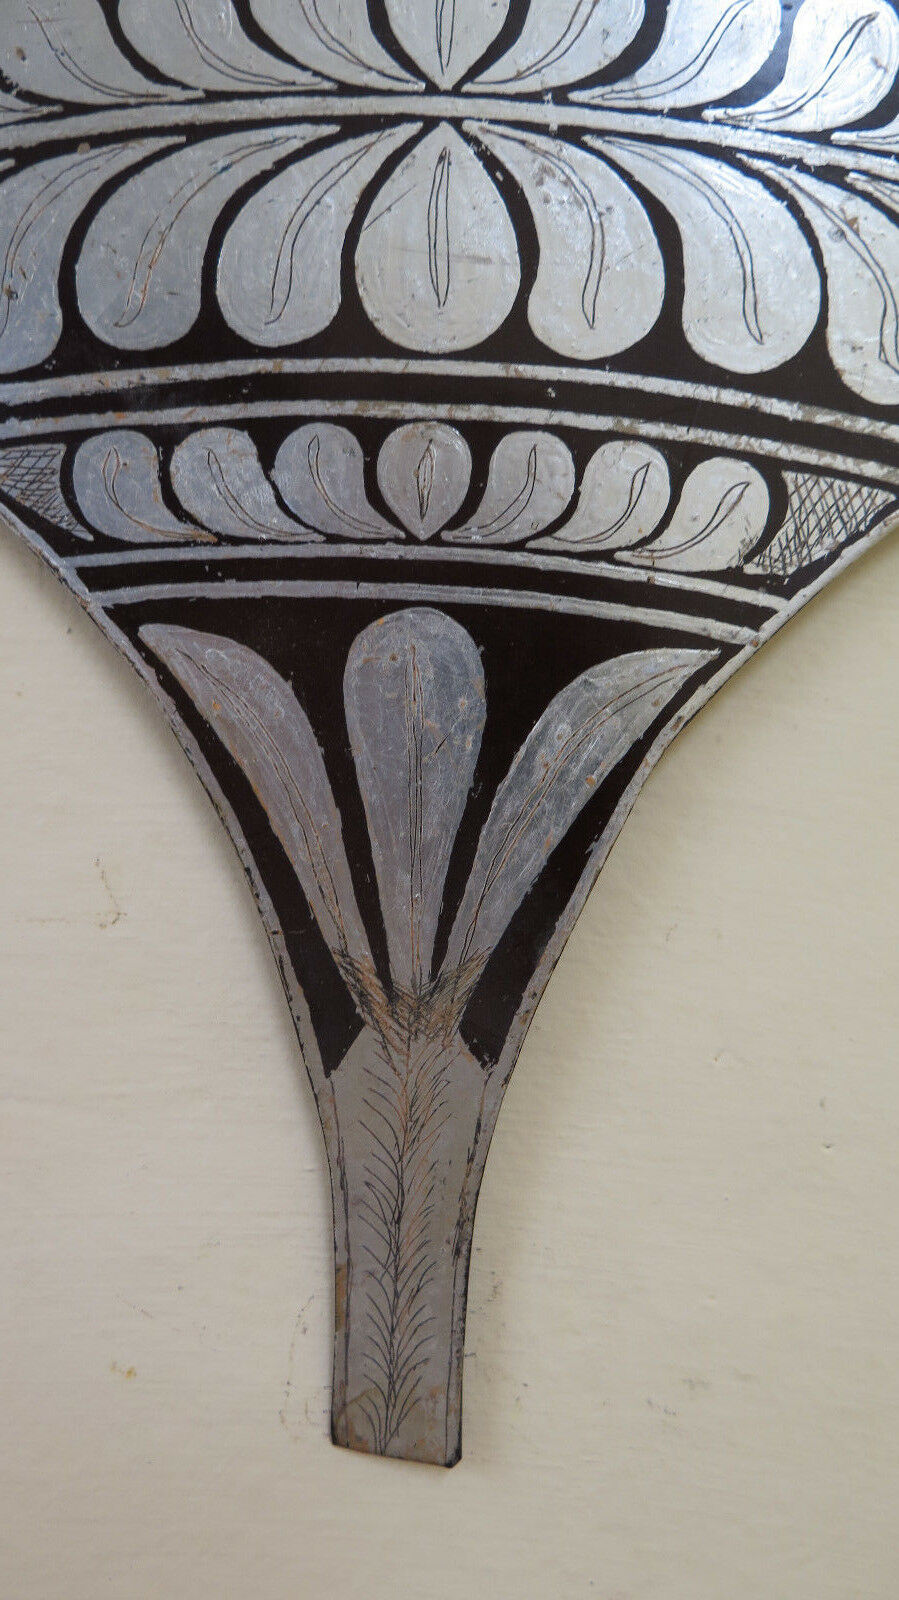 ANCIENT FLORAL STYLE FRIEZE PAINTED AND ENGRAVED WITH A BURIC ON WROUGHT IRON CH13 20